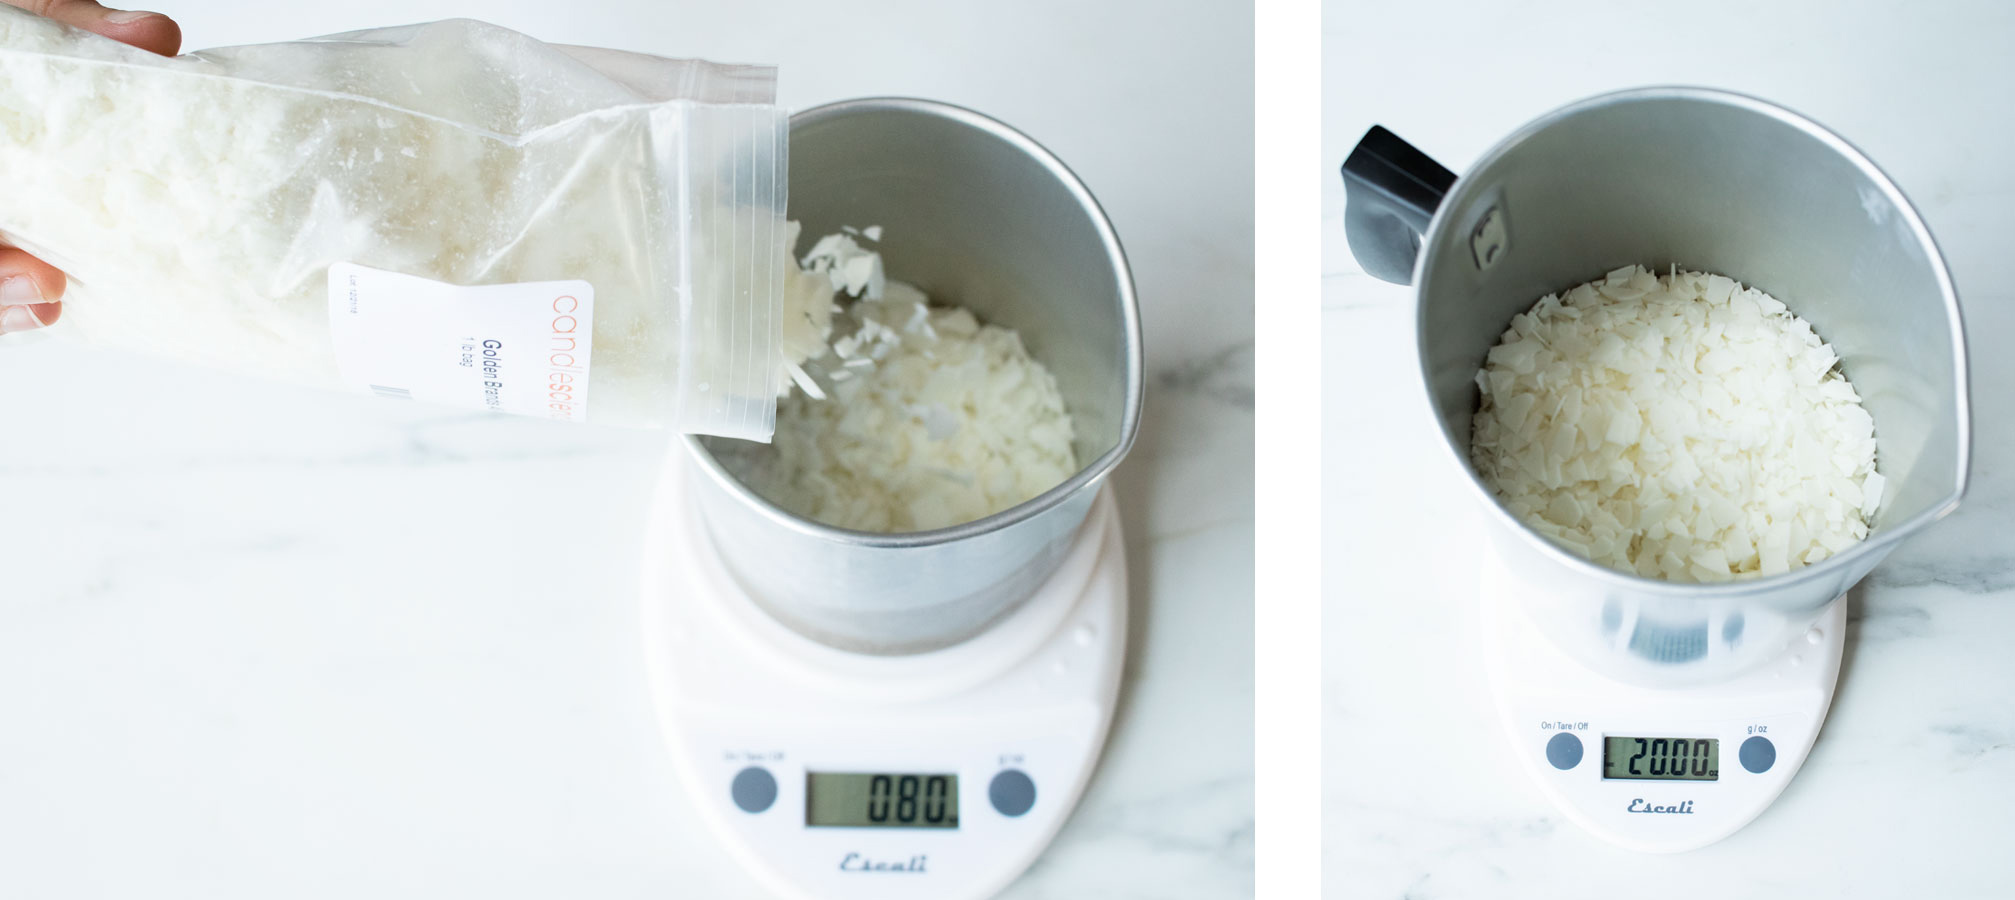 Pouring soy wax flakes into a pouring pitcher on a candle scale.